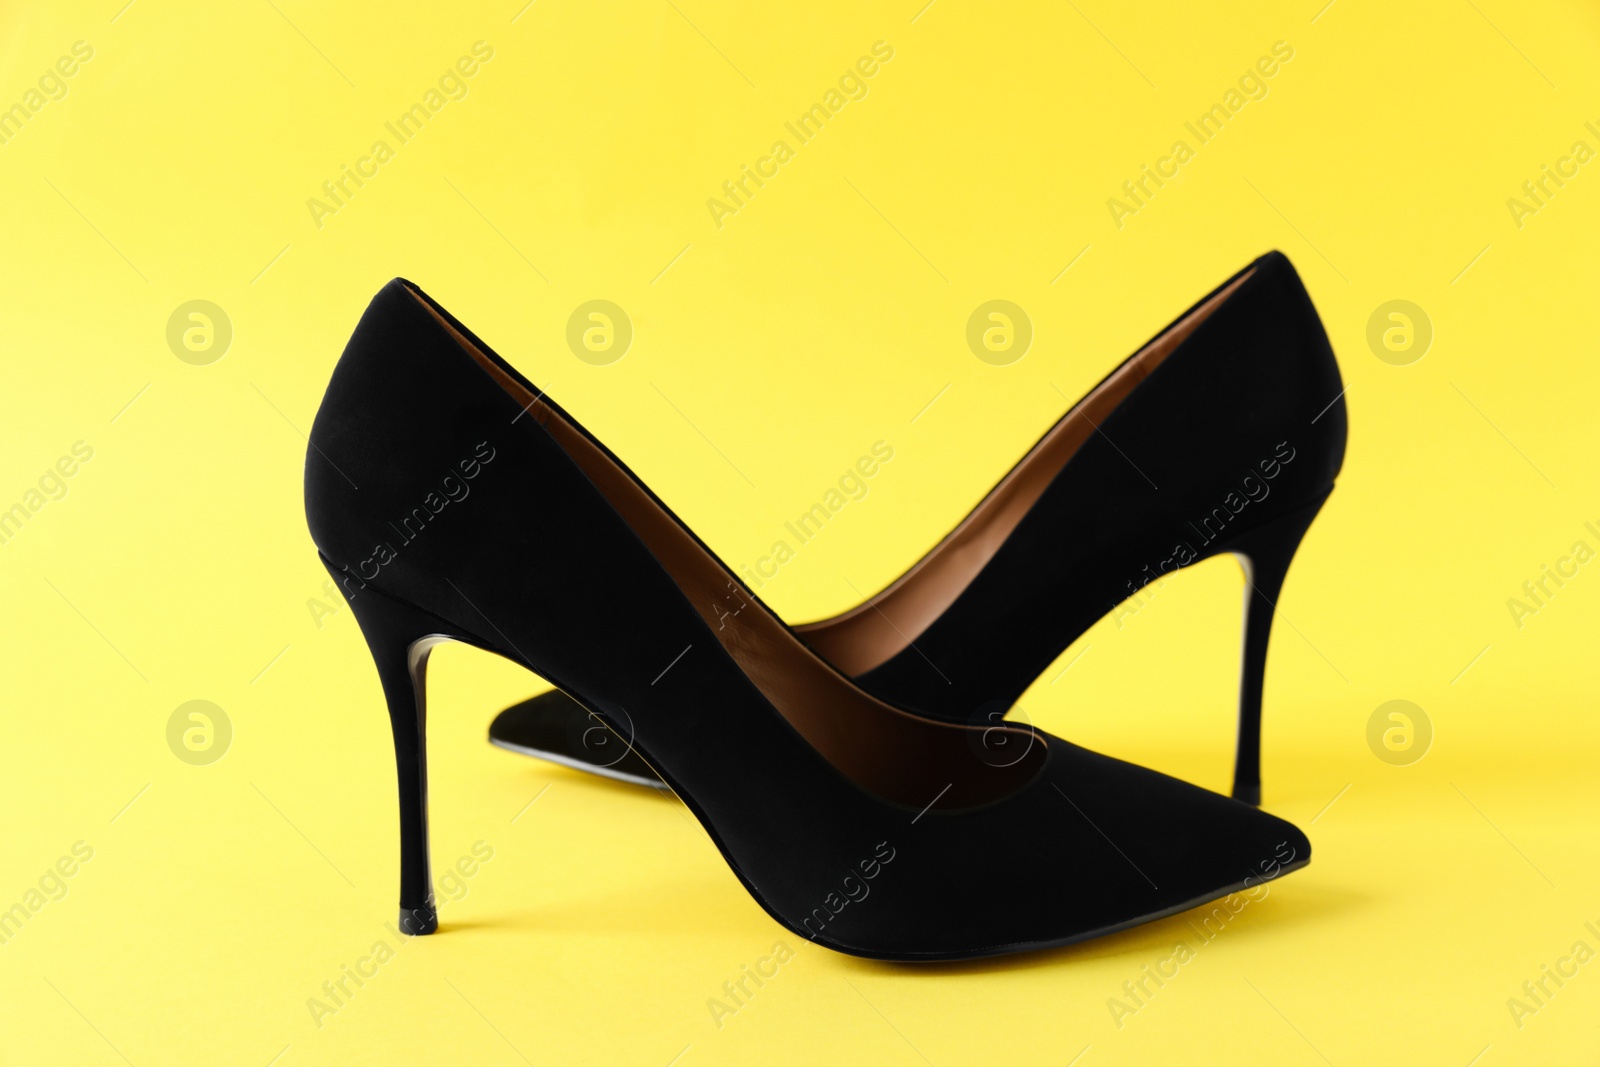 Photo of Pair of elegant black high heel shoes on yellow background